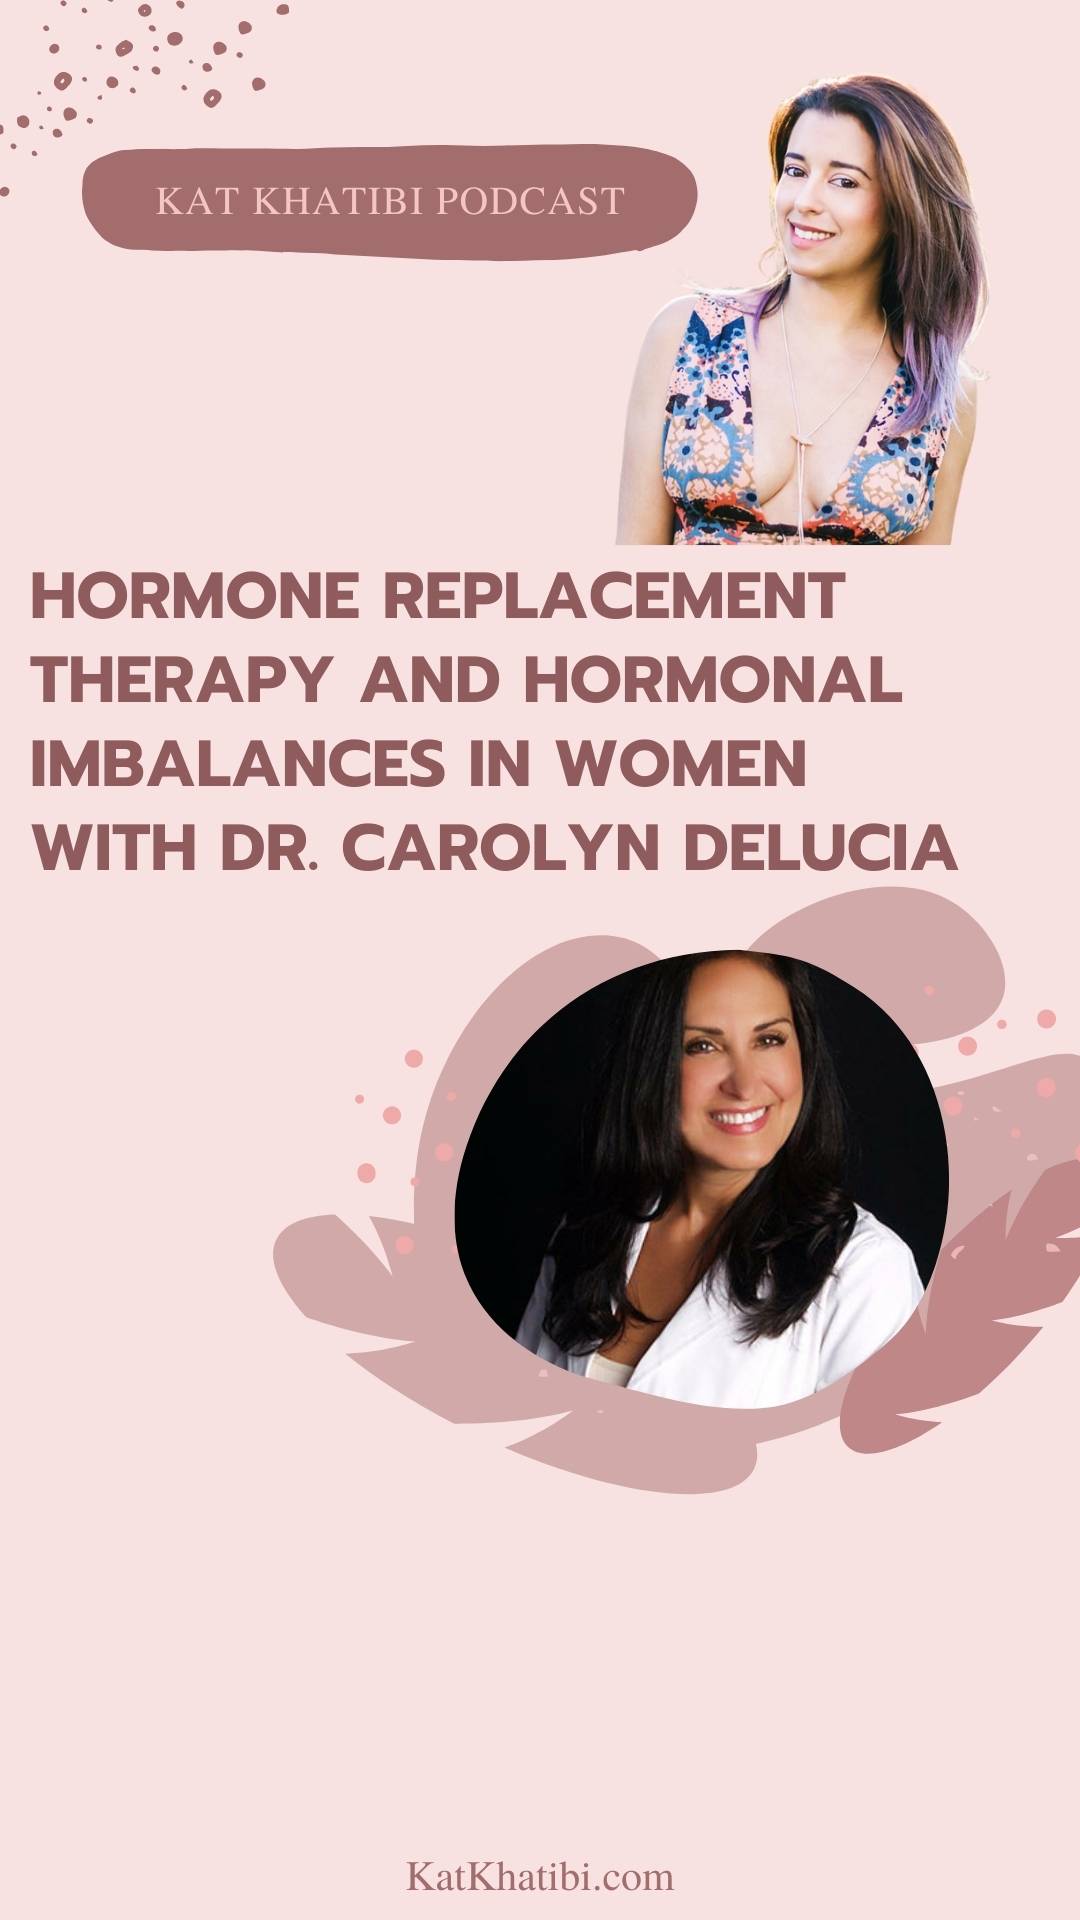 Hormonal Imbalances in Women and Bioidentical Hormone Therapy with Dr. Carolyn DeLucia